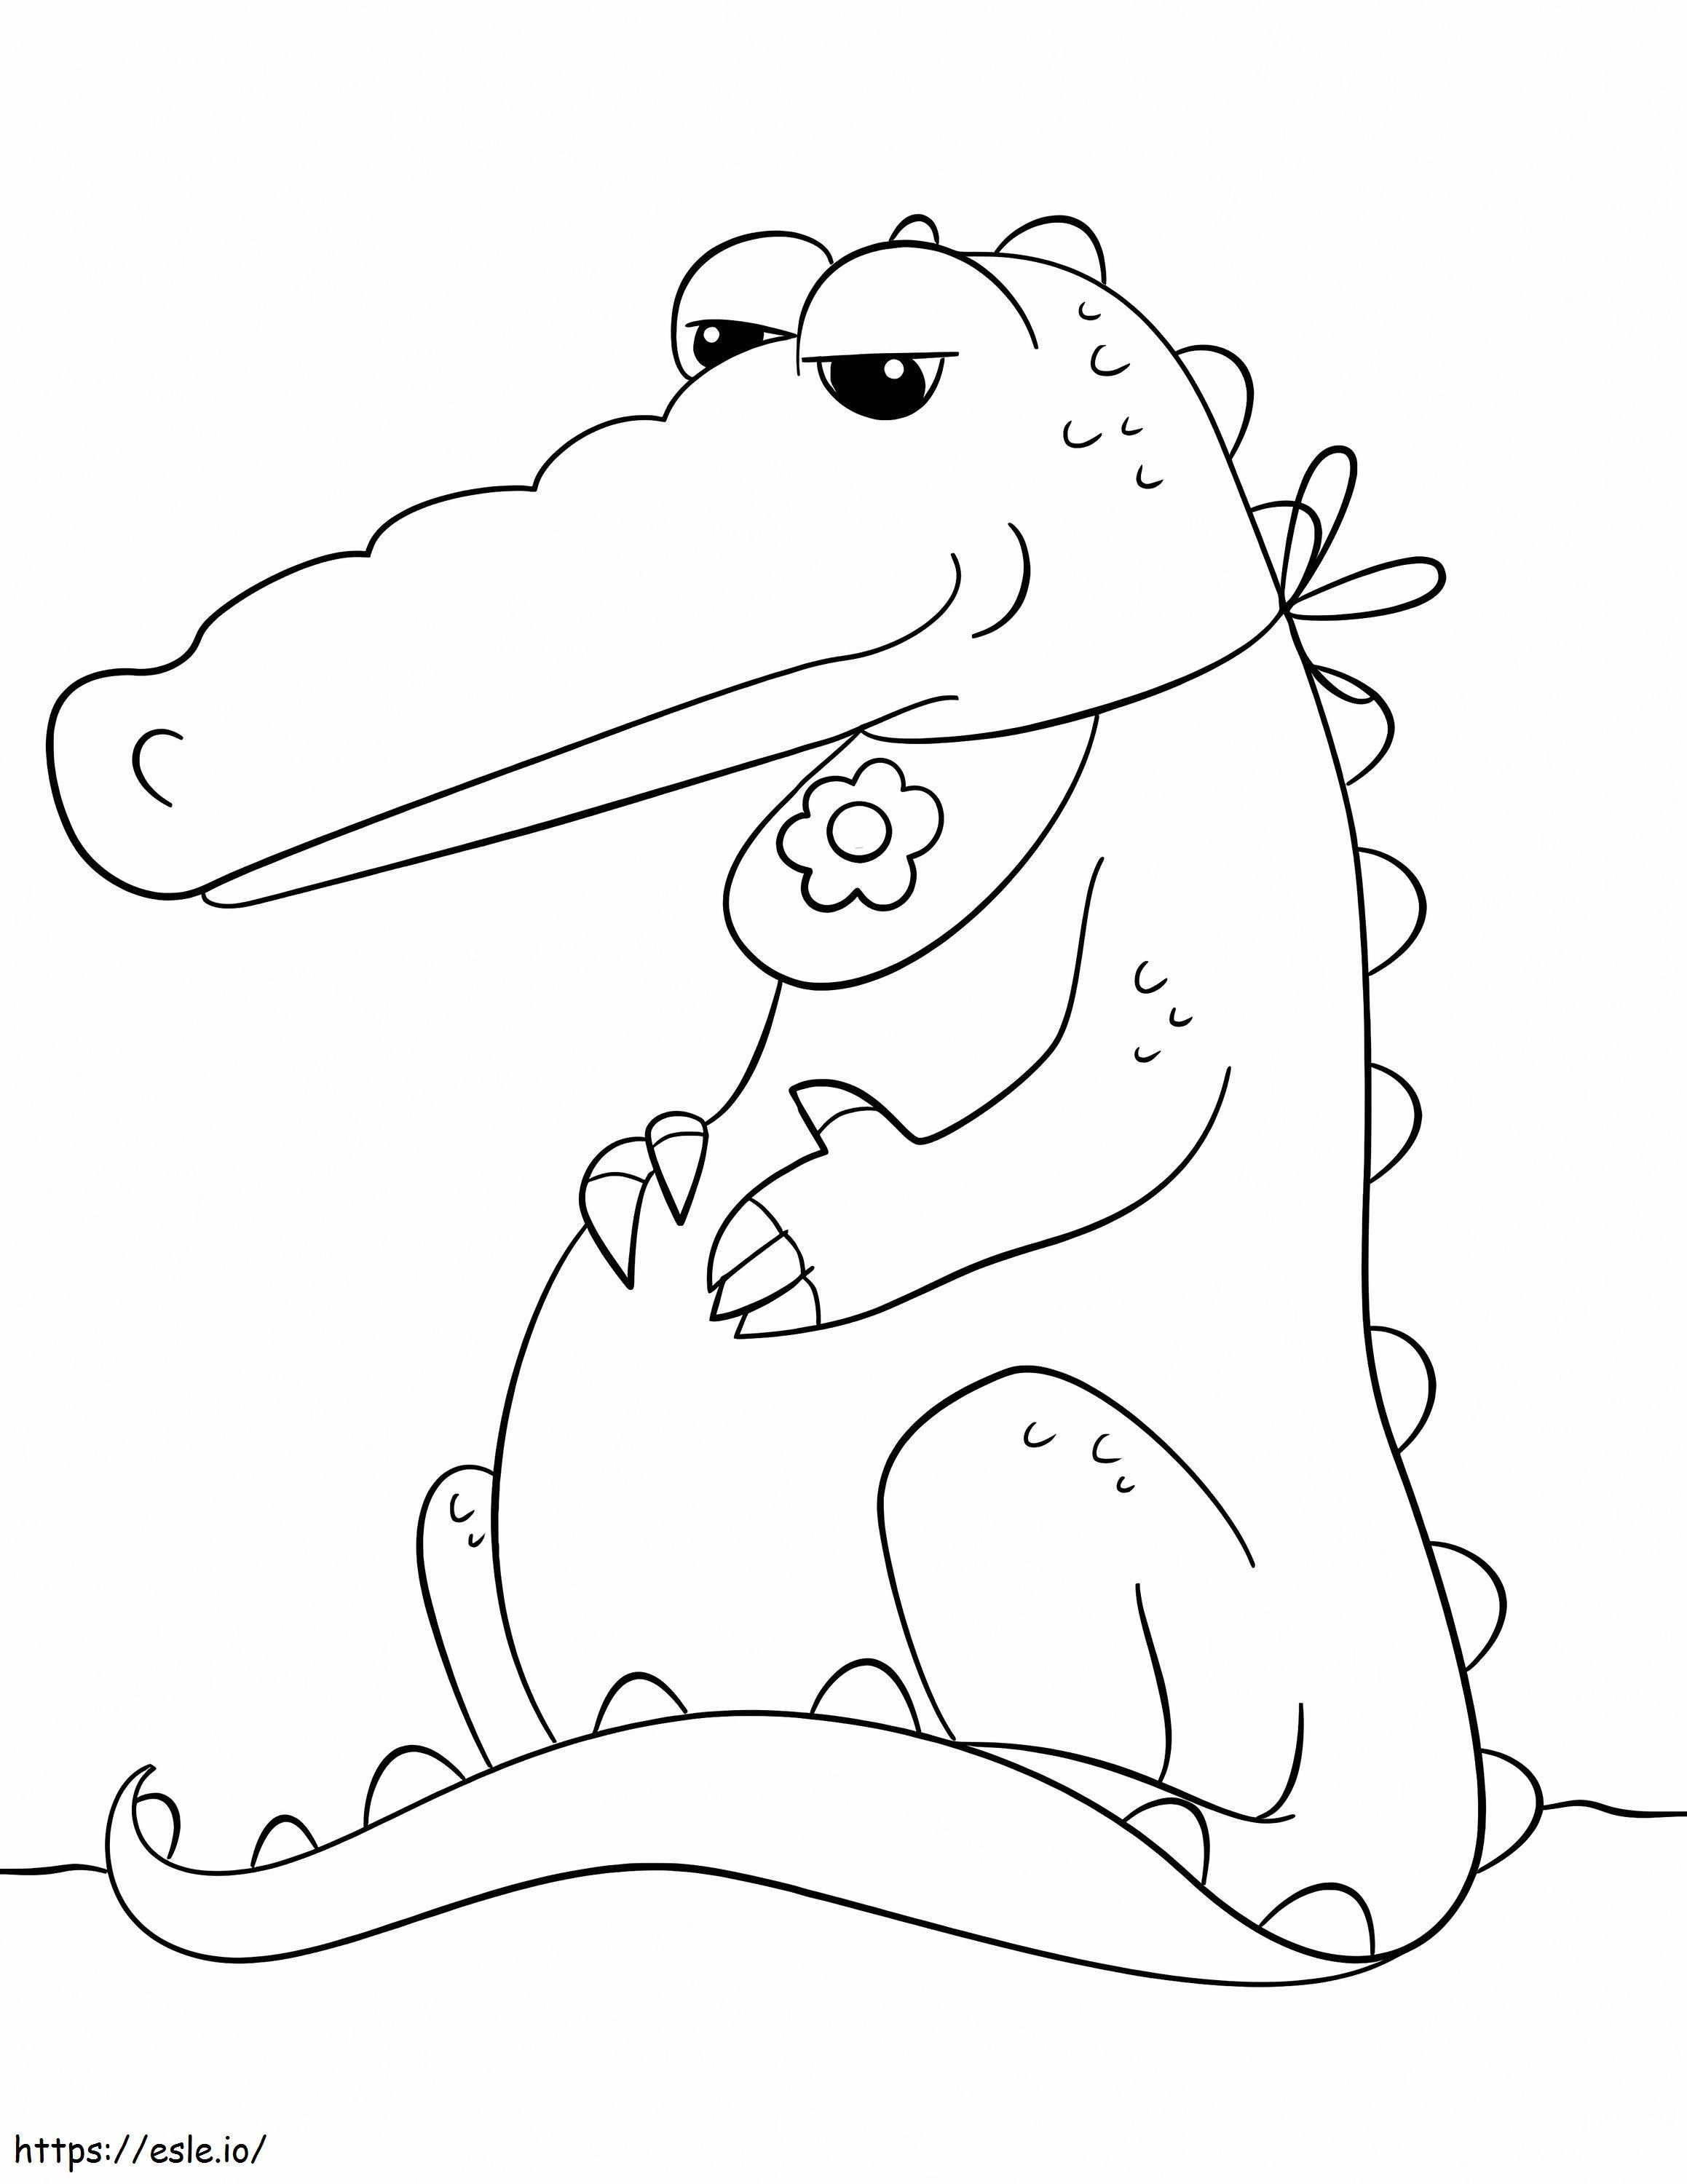 Sitting Crocodile coloring page